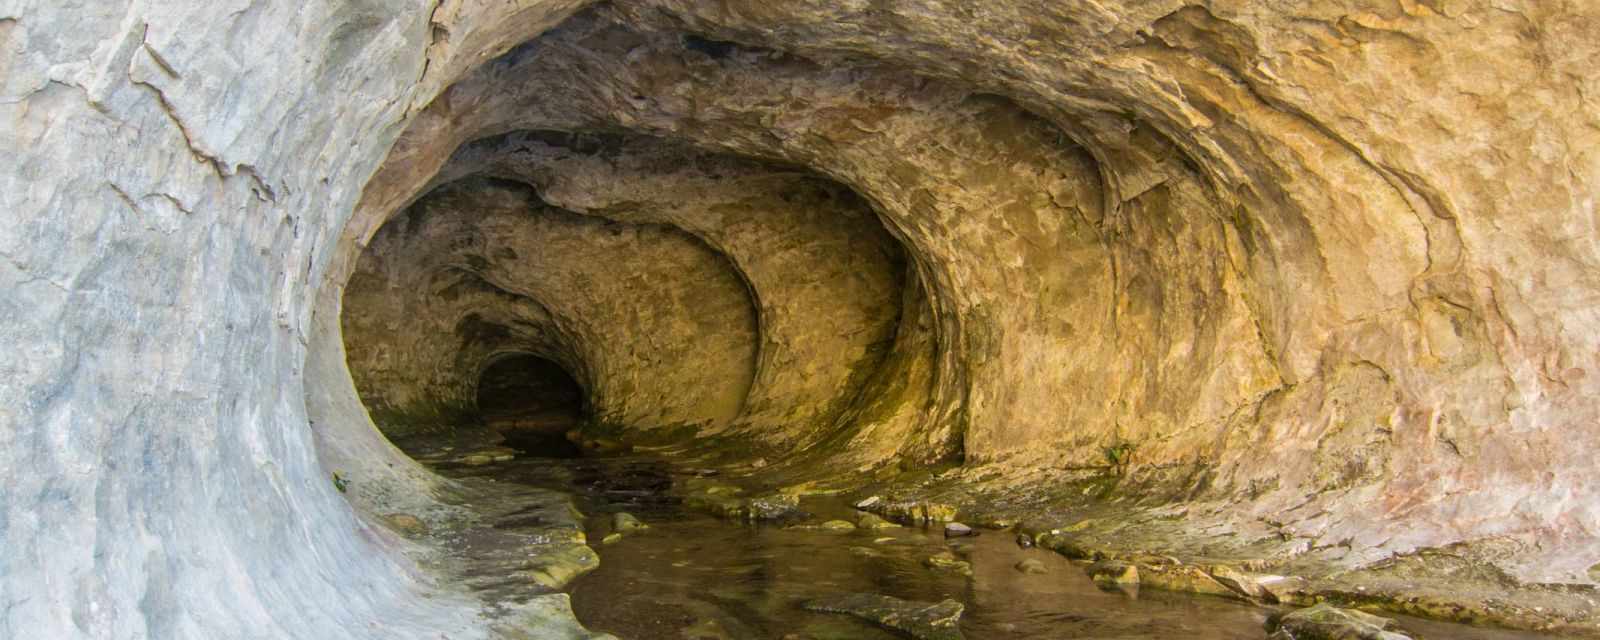 7 Tips to Master the Cave Stream at Arthurs Pass